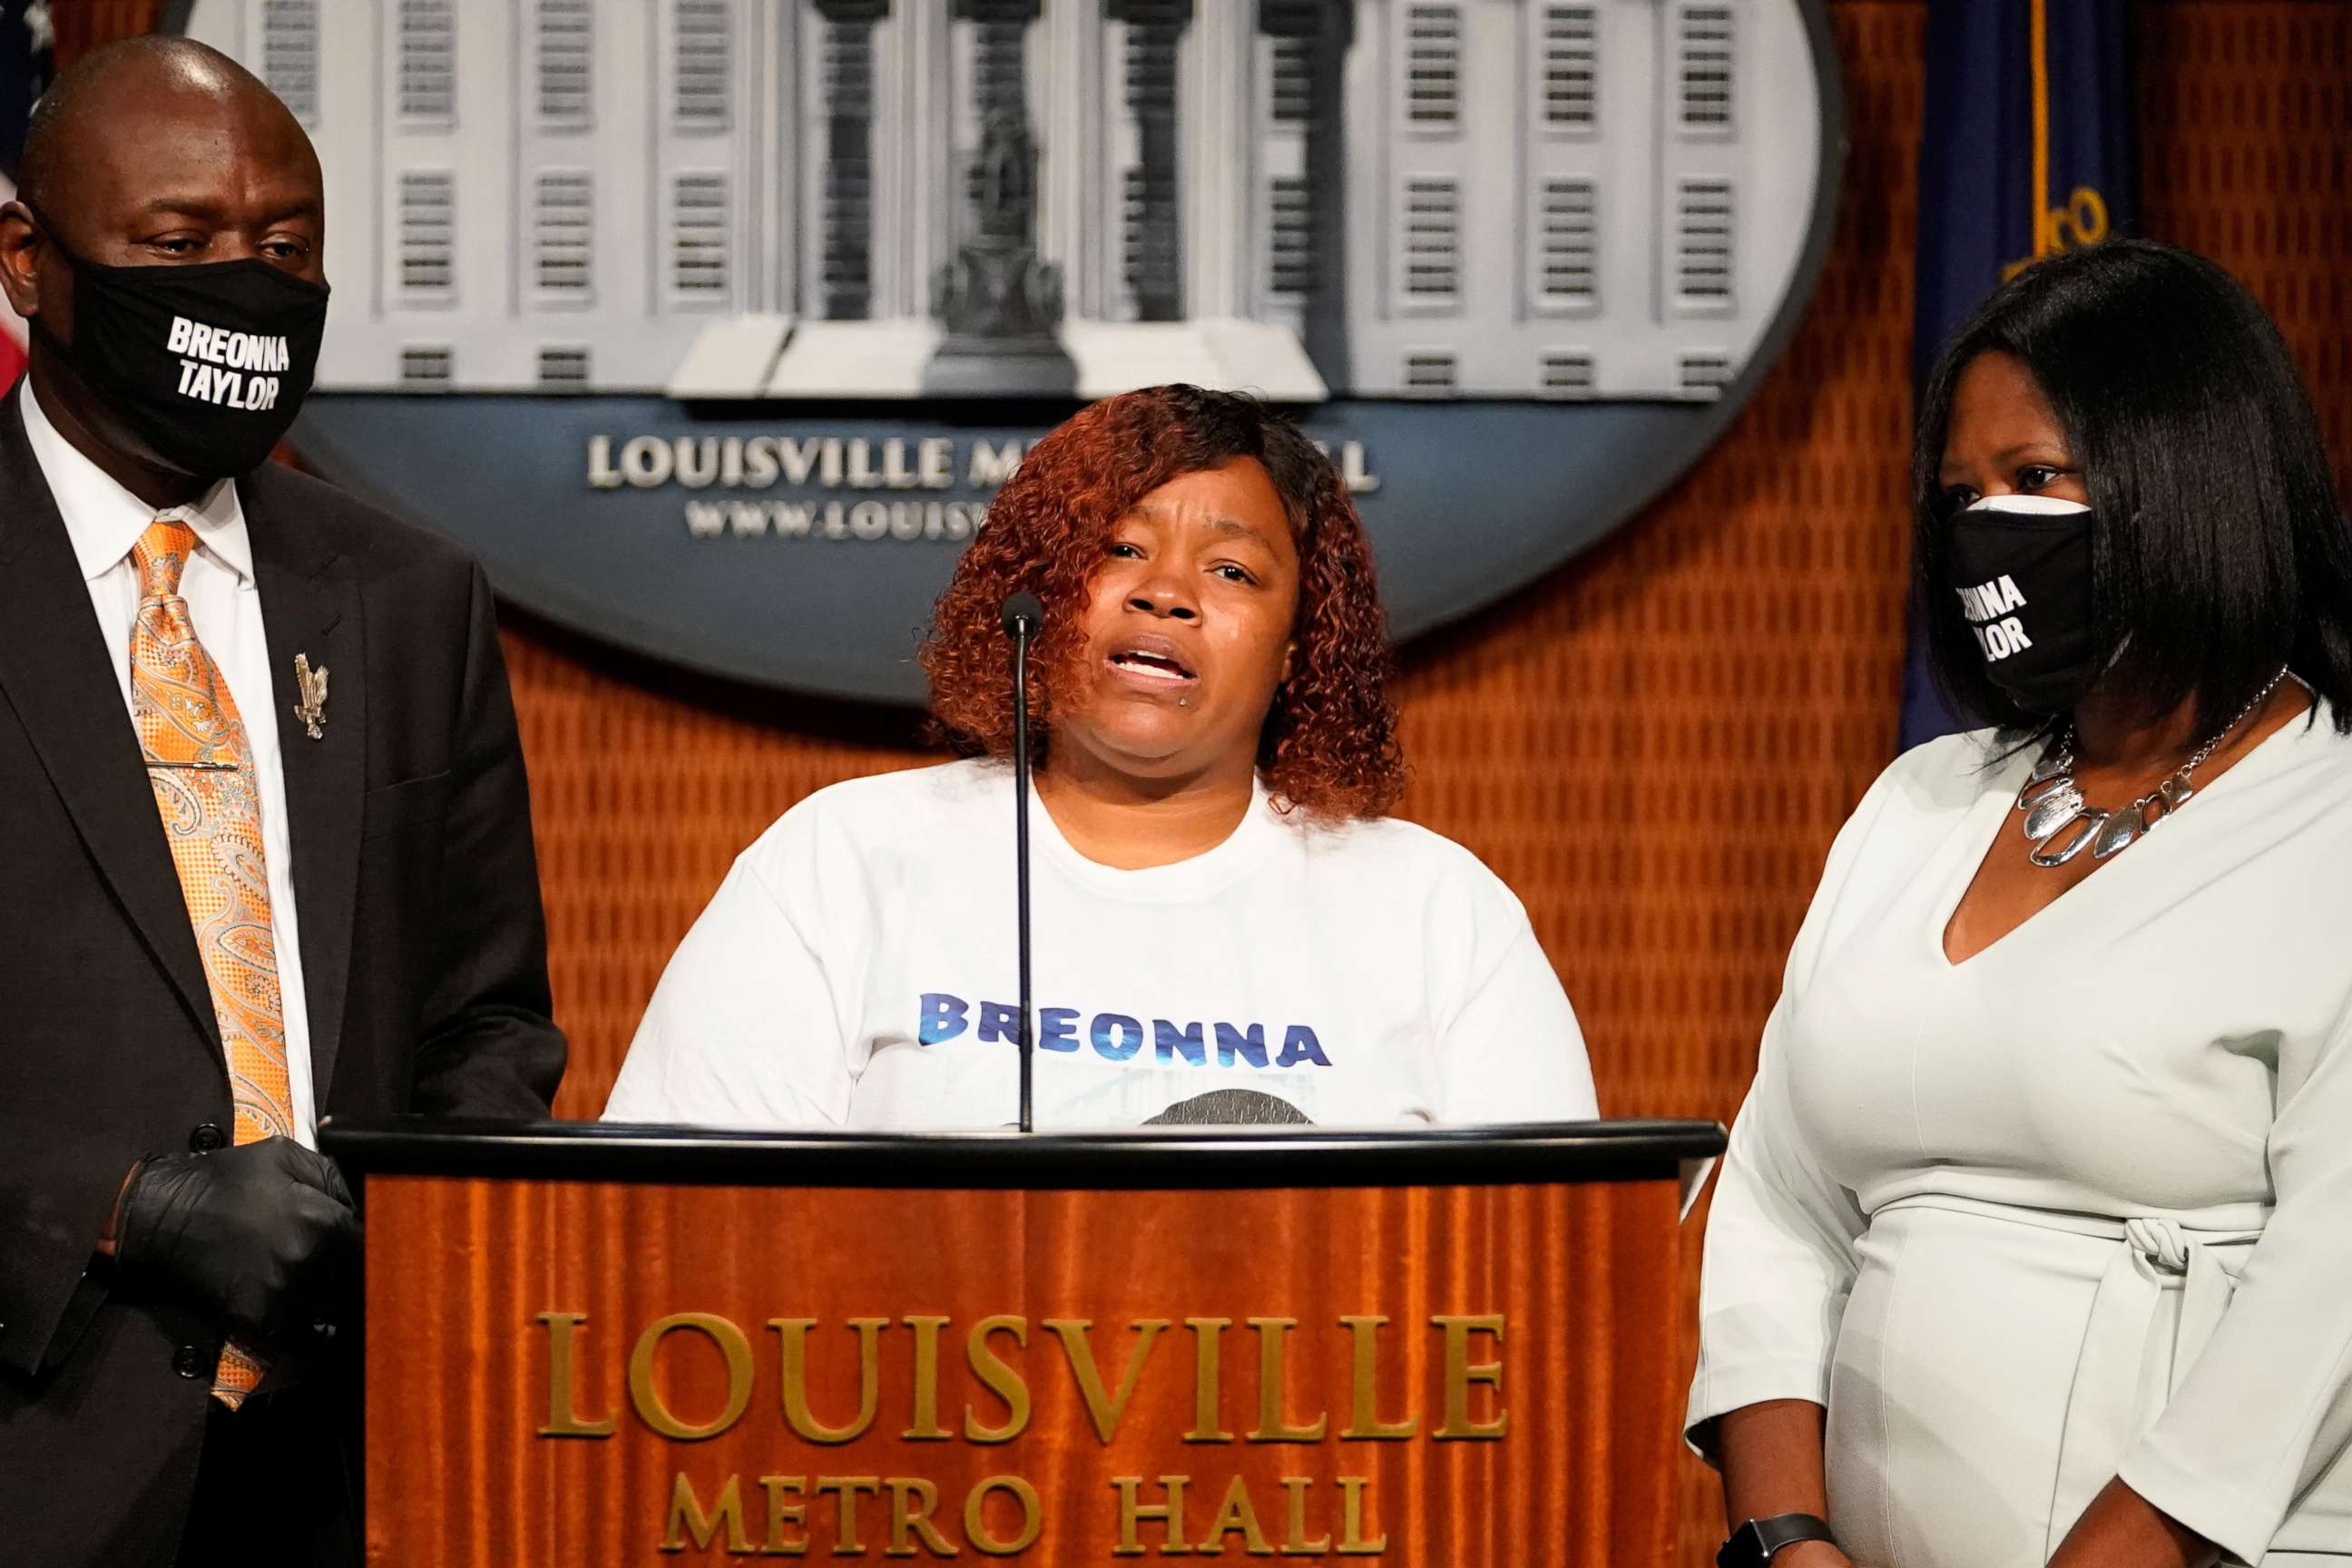 PHOTO: Tamika Palmer, the mother of Breonna Taylor, speaks during a news conference announcing a $12 million civil settlement between the estate of Breonna Taylor and the City of Lousiville, in Louisville, Kentucky, Sept. 15, 2020.